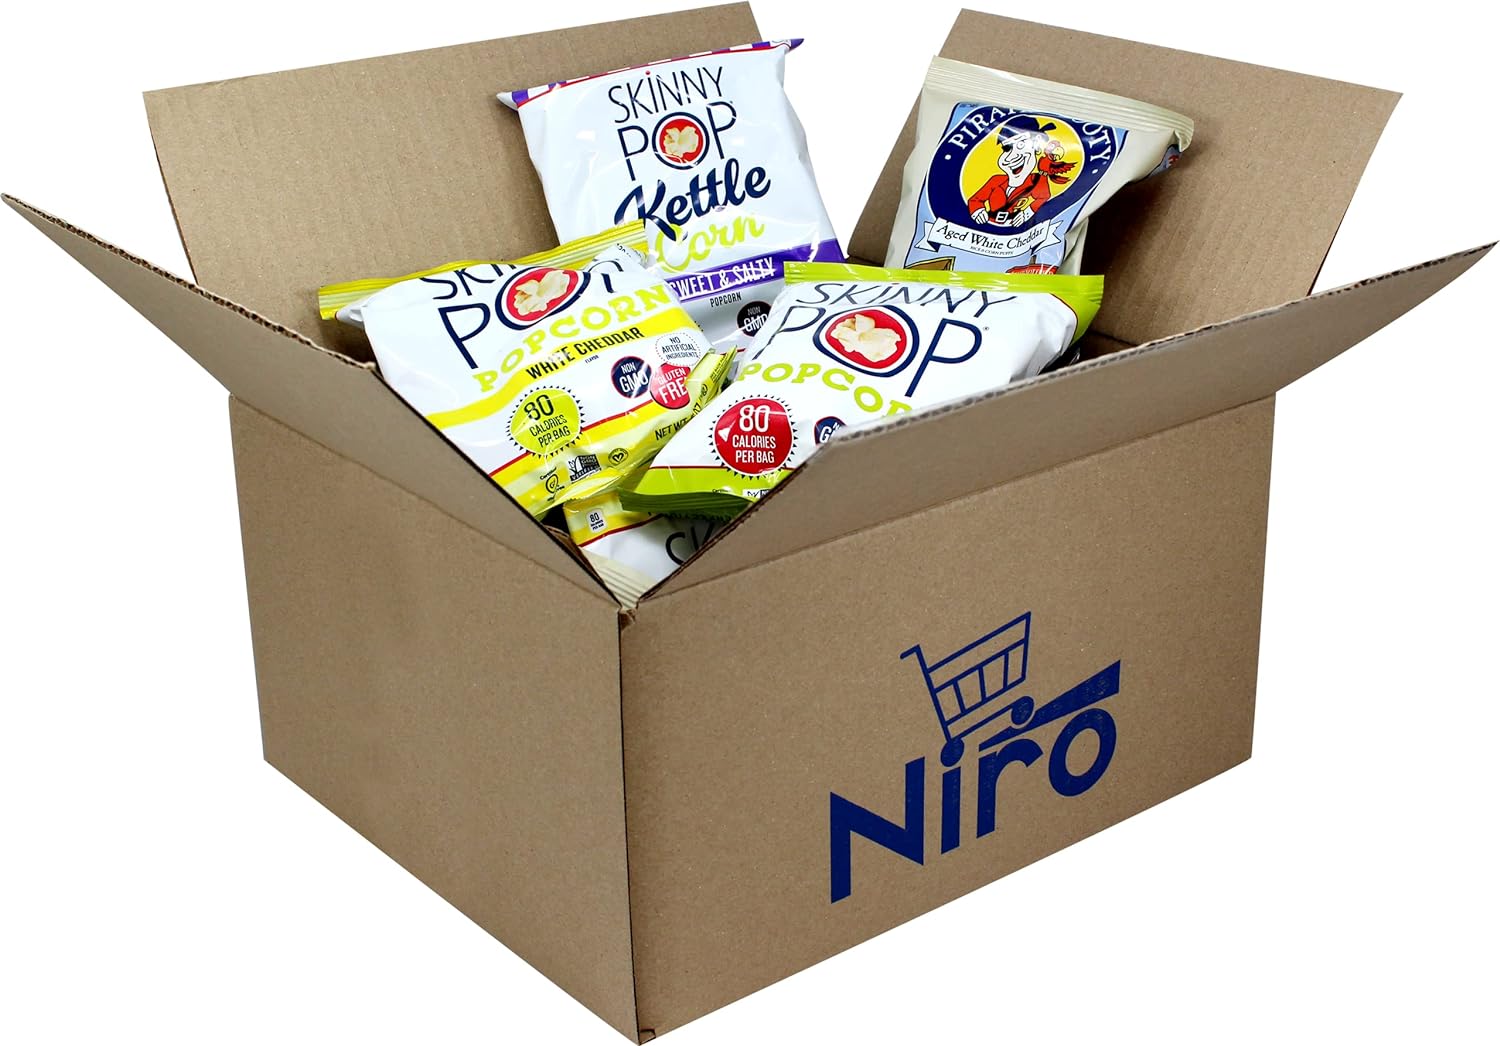 16 Individual Bags of Popcorn, Bulk Popcorn, Skinny Pop & Pirate's Booty Snack Pack – 16 Pack Variety Kit with 4 Delicious Flavors | Individual Popcorn Bags | Niro Assortment